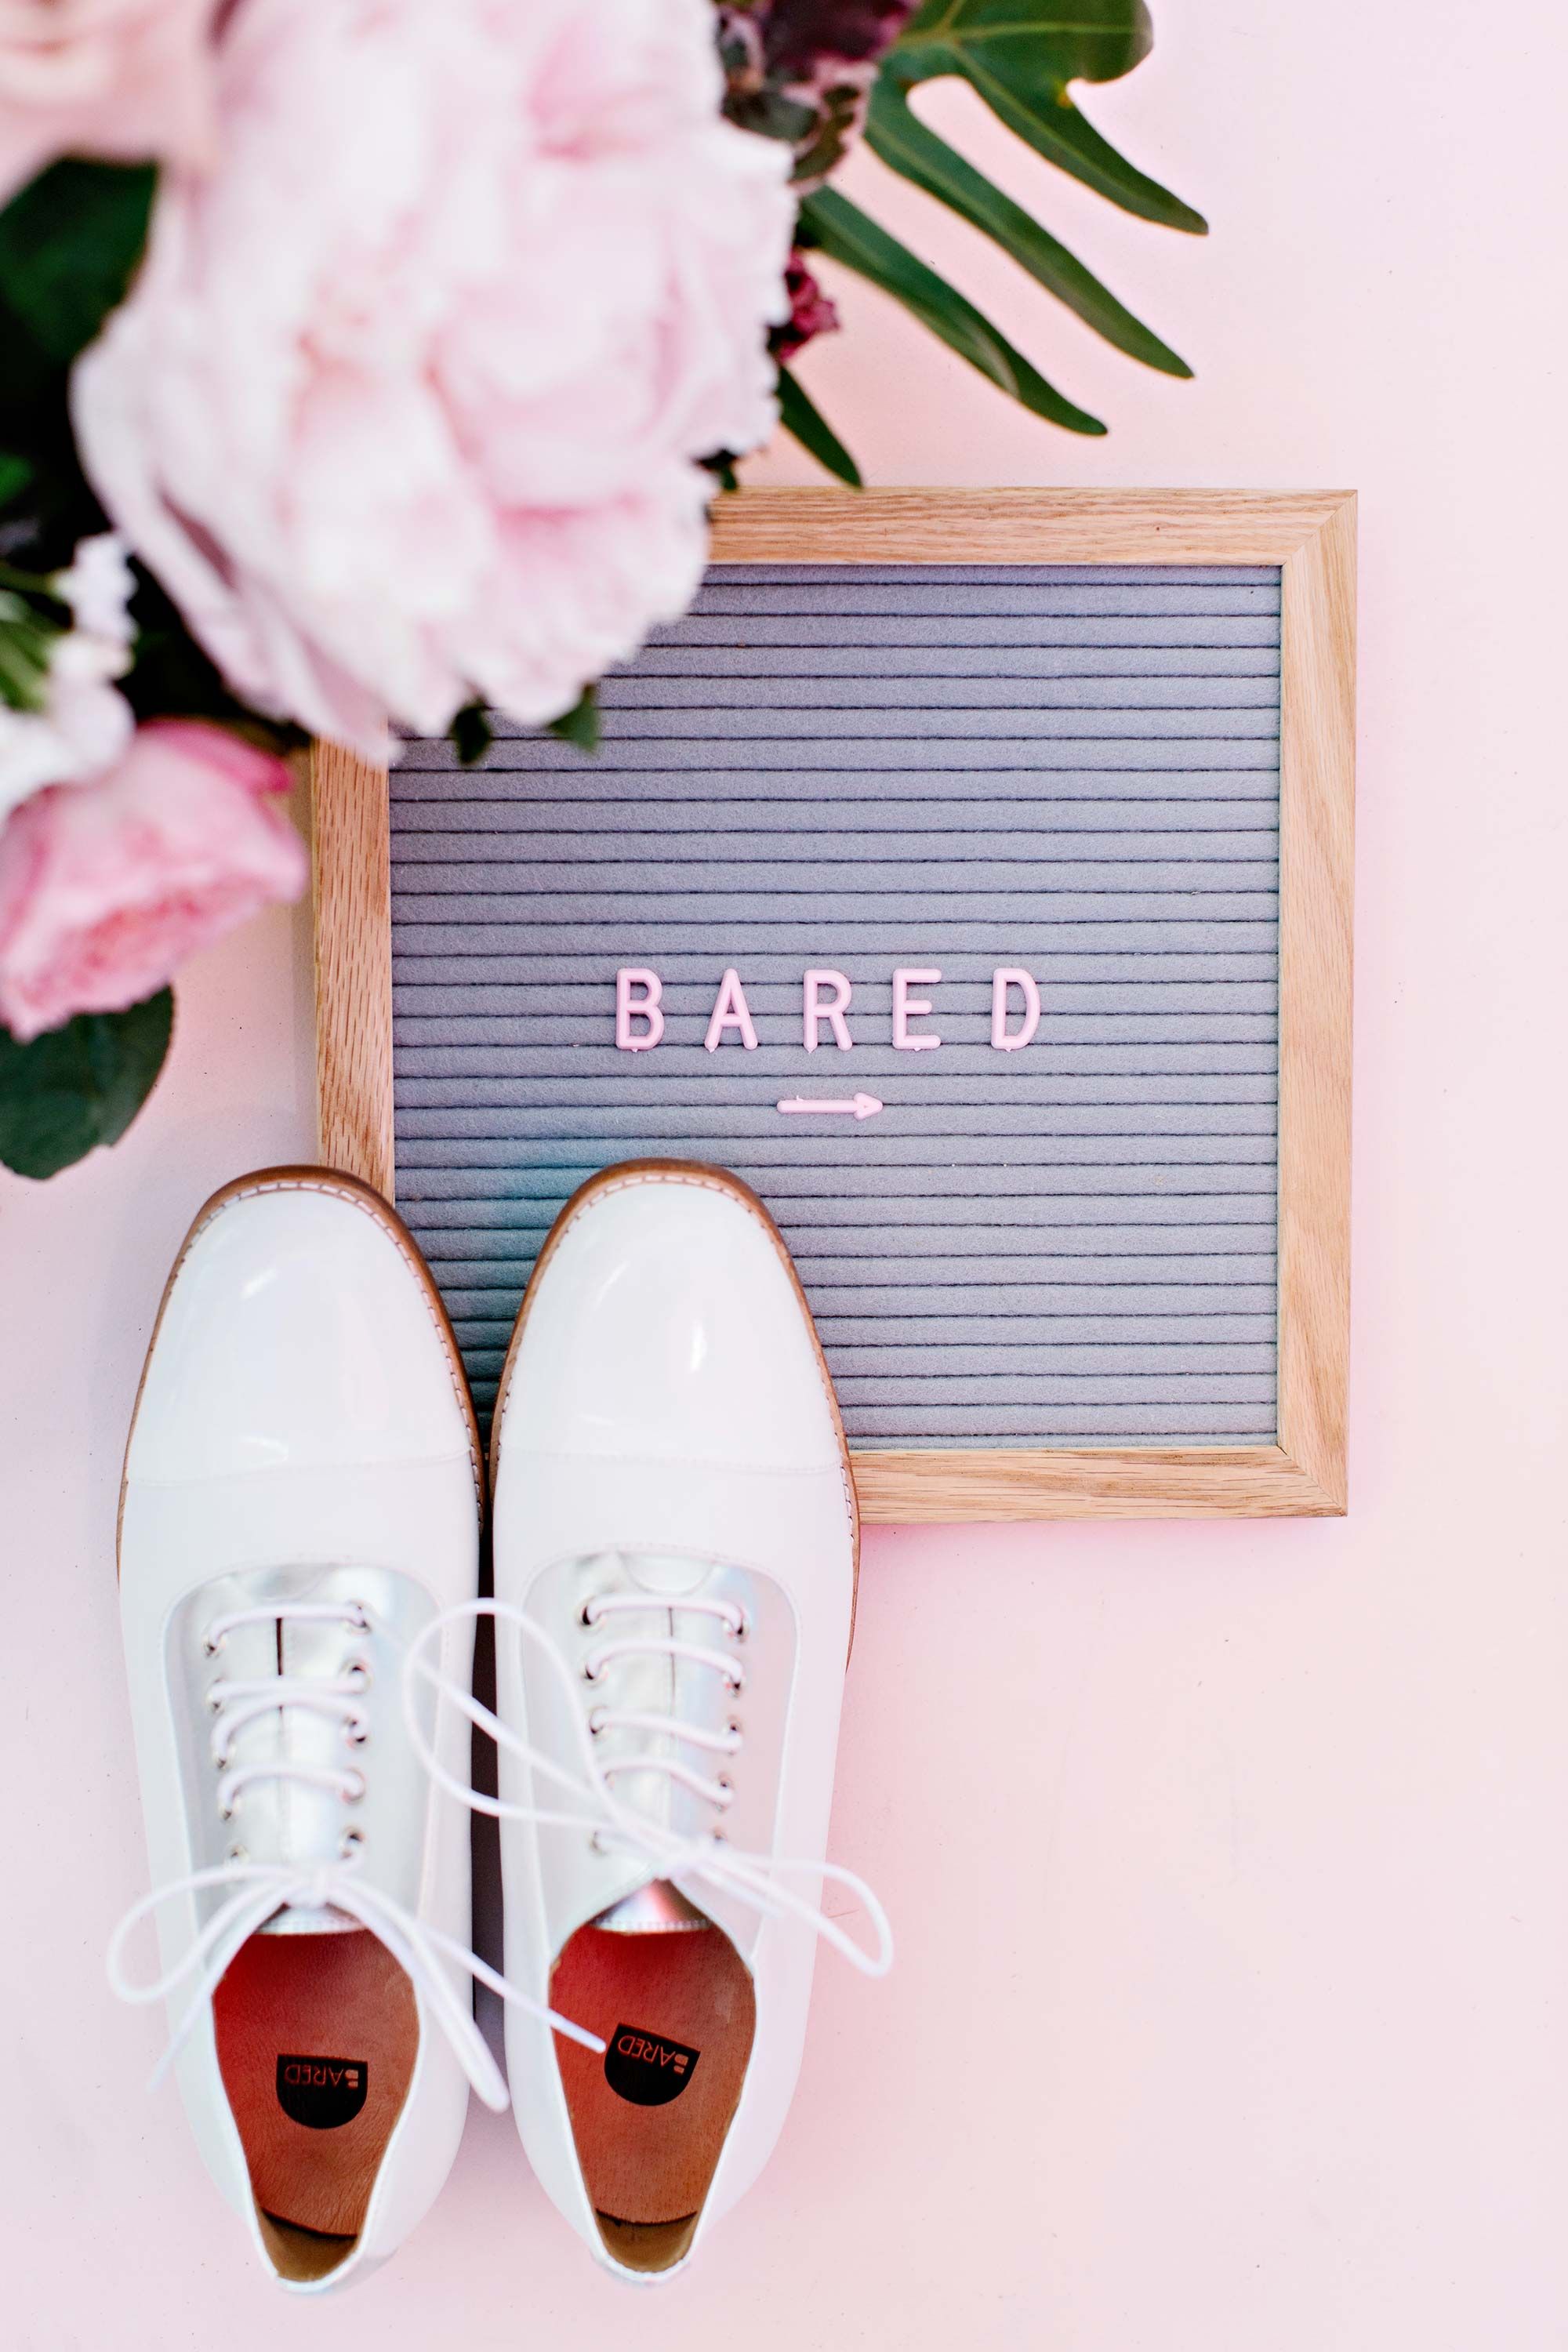 Bared_Footwear_Womens_Collaboration_Party_With_Lenzo_NYE_Styling_Wagtail_Lace_Ups